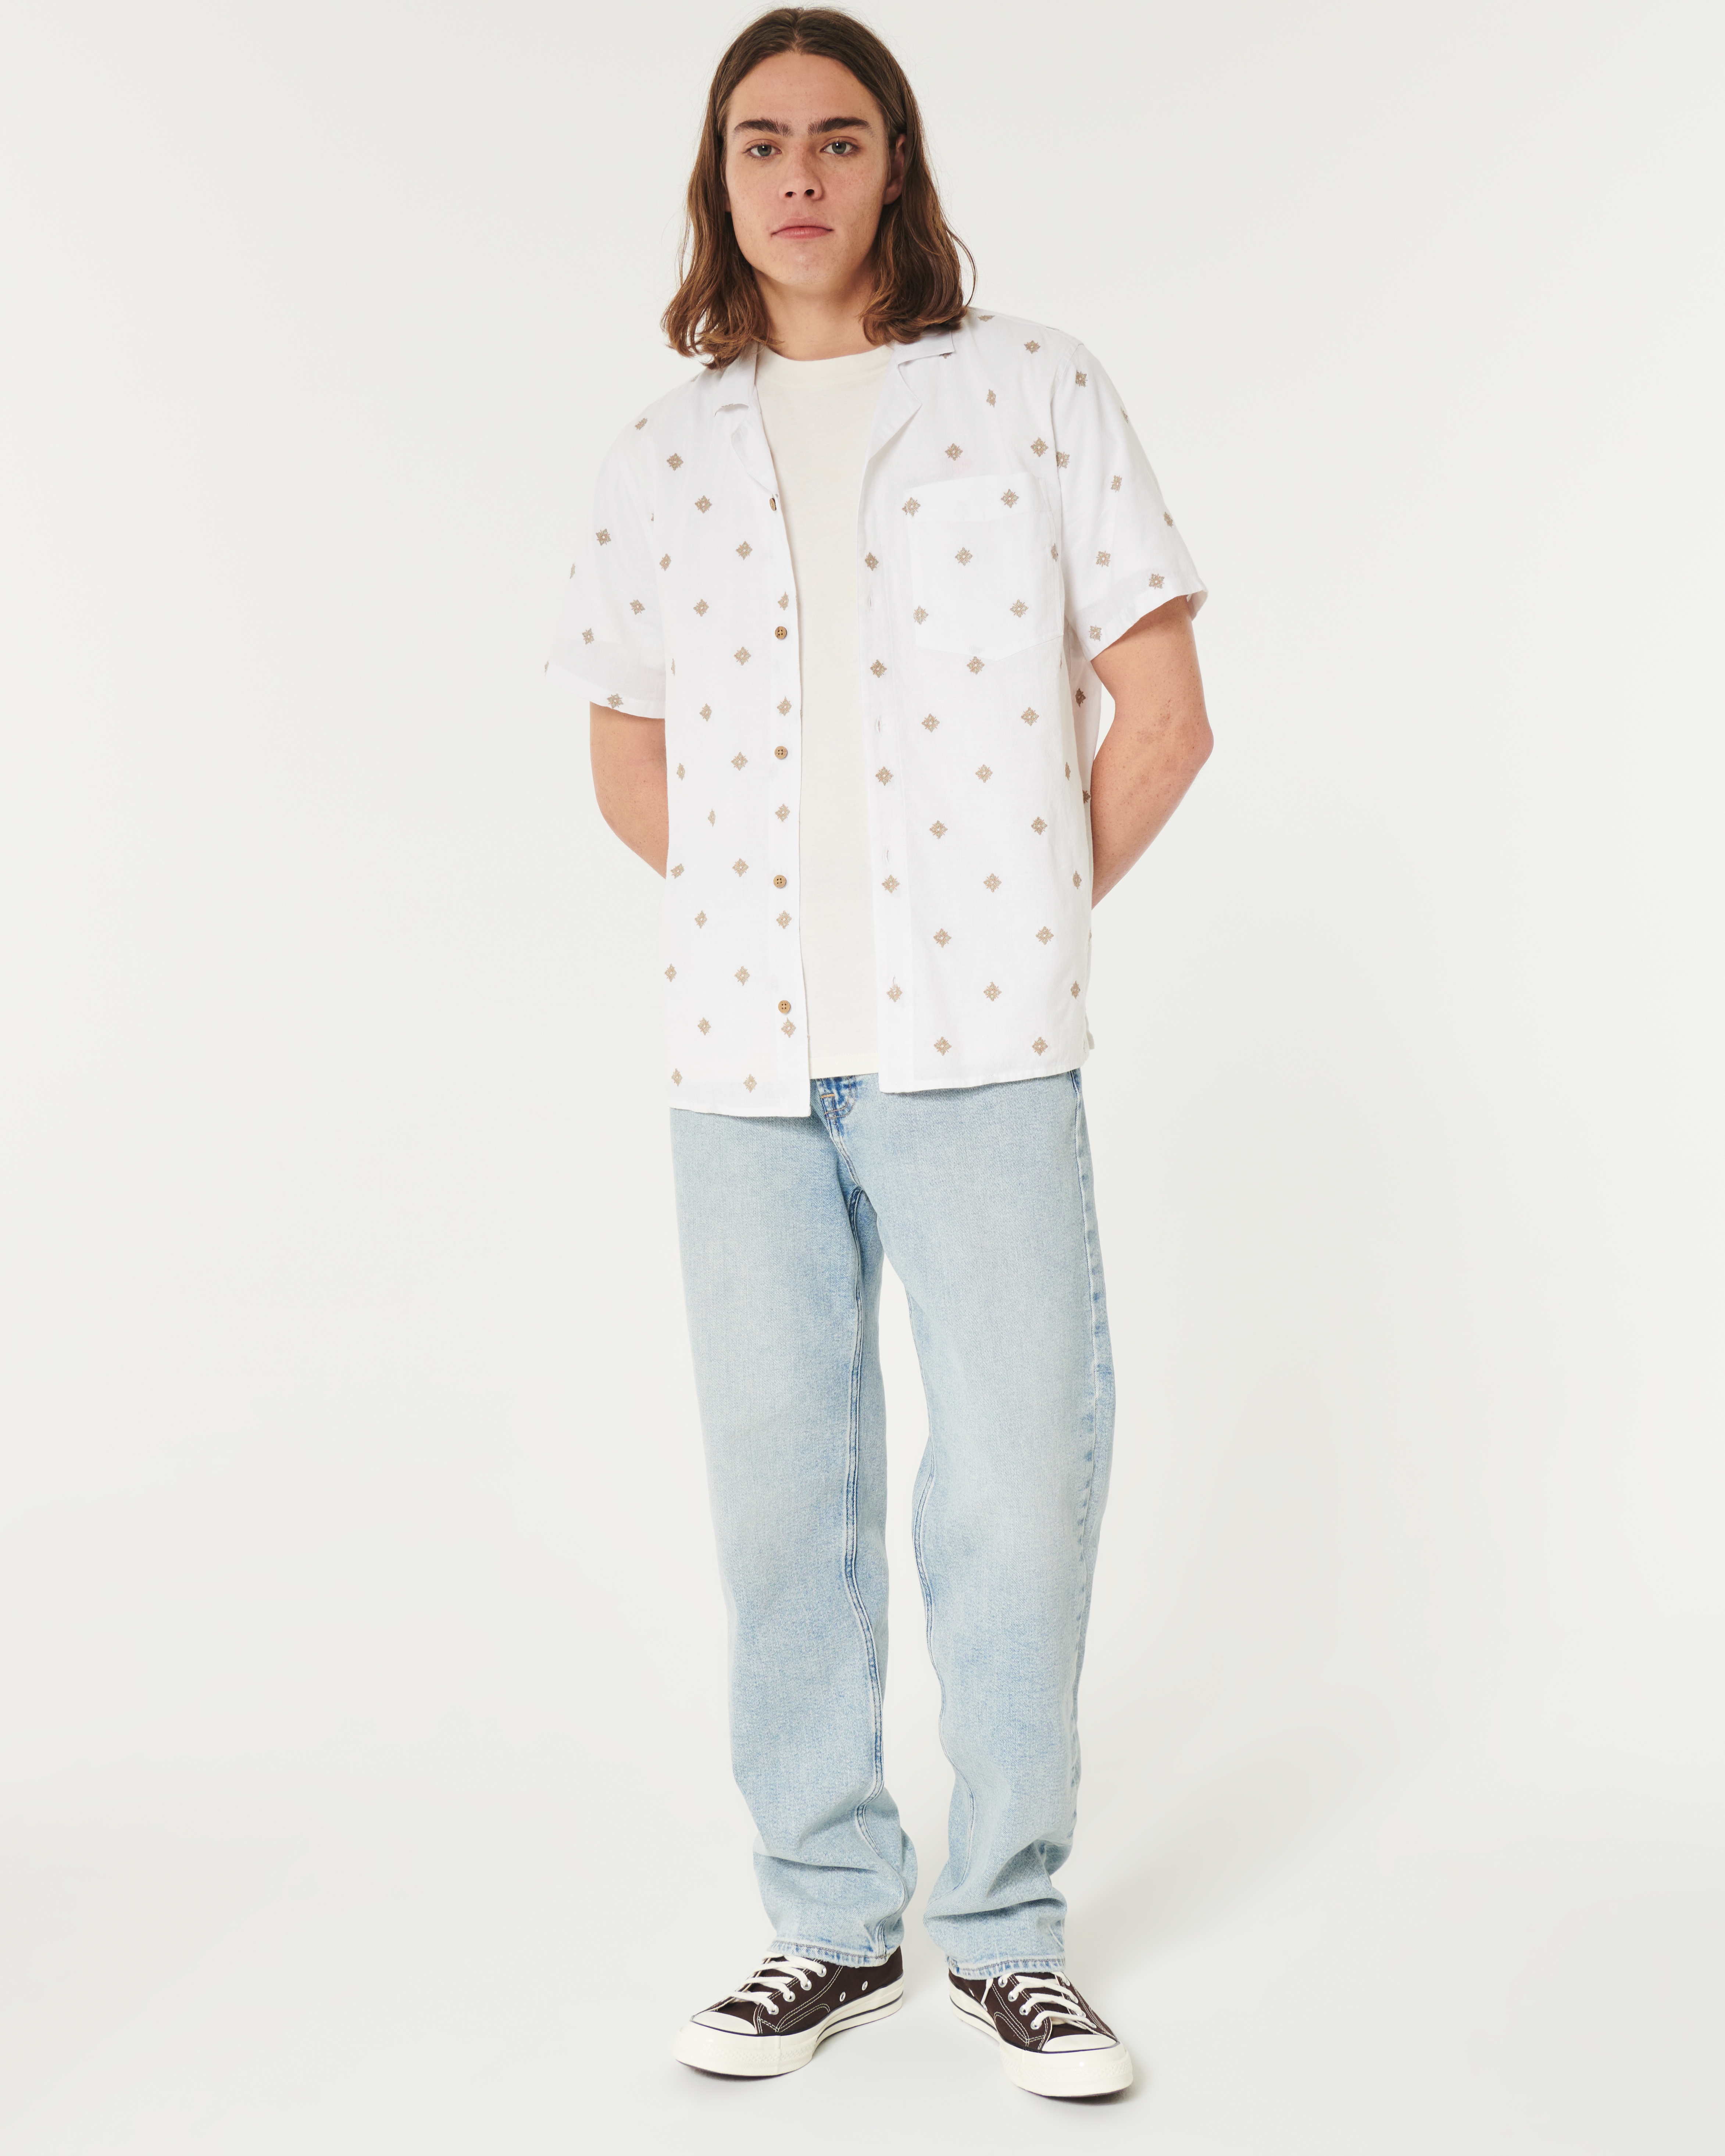 Short-Sleeve Embroidered Pattern Shirt